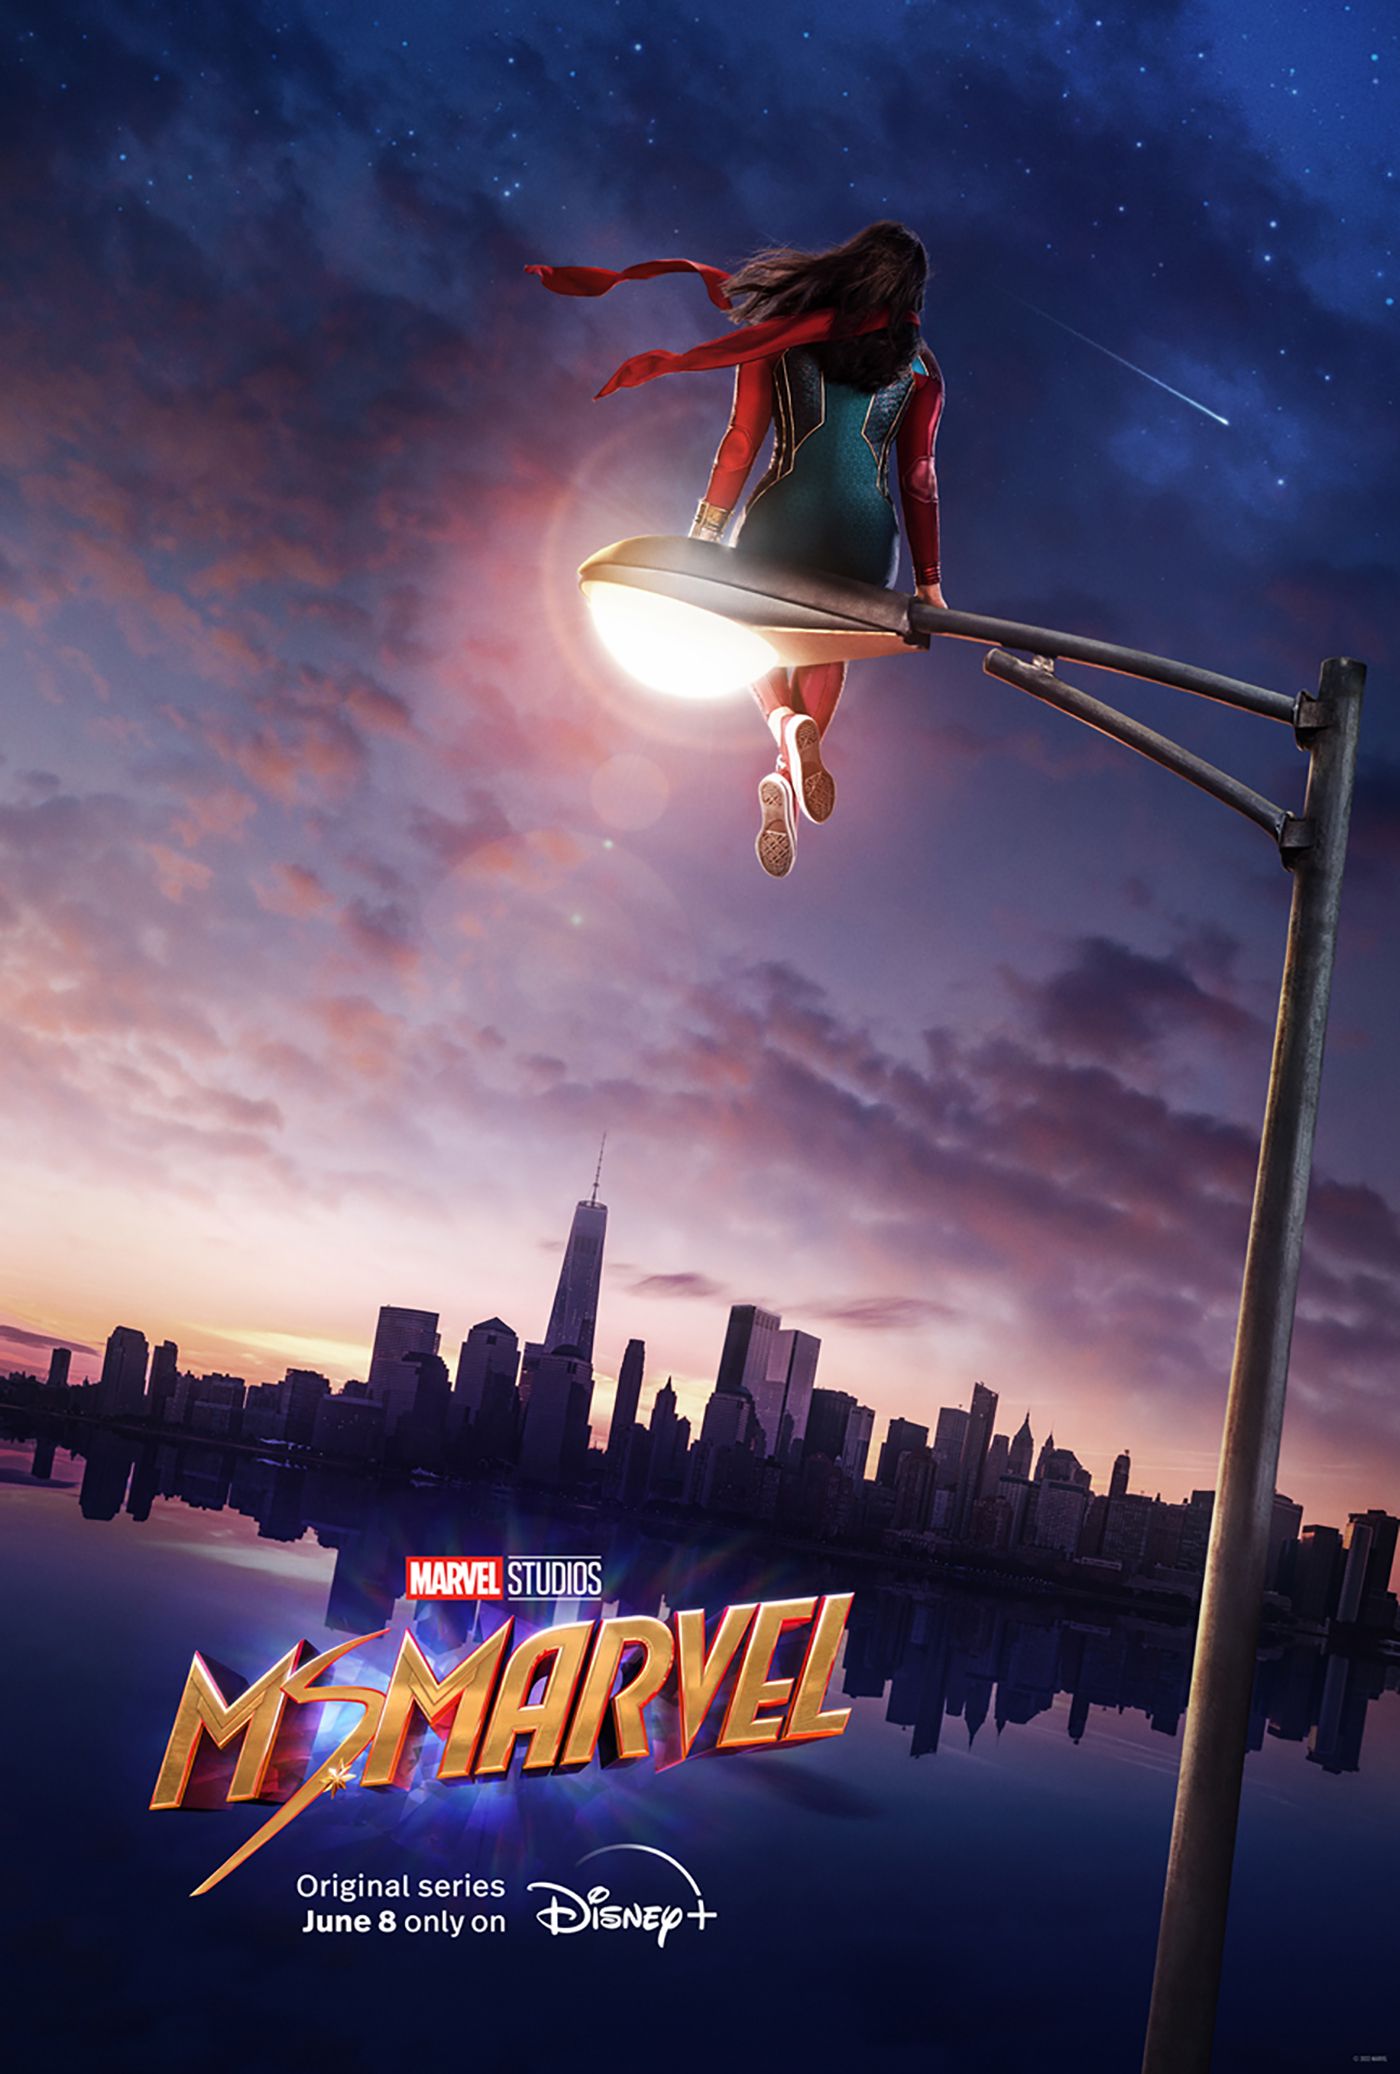 Ms Marvel Release Date Confirmed, Next MCU Show After Moon Knight